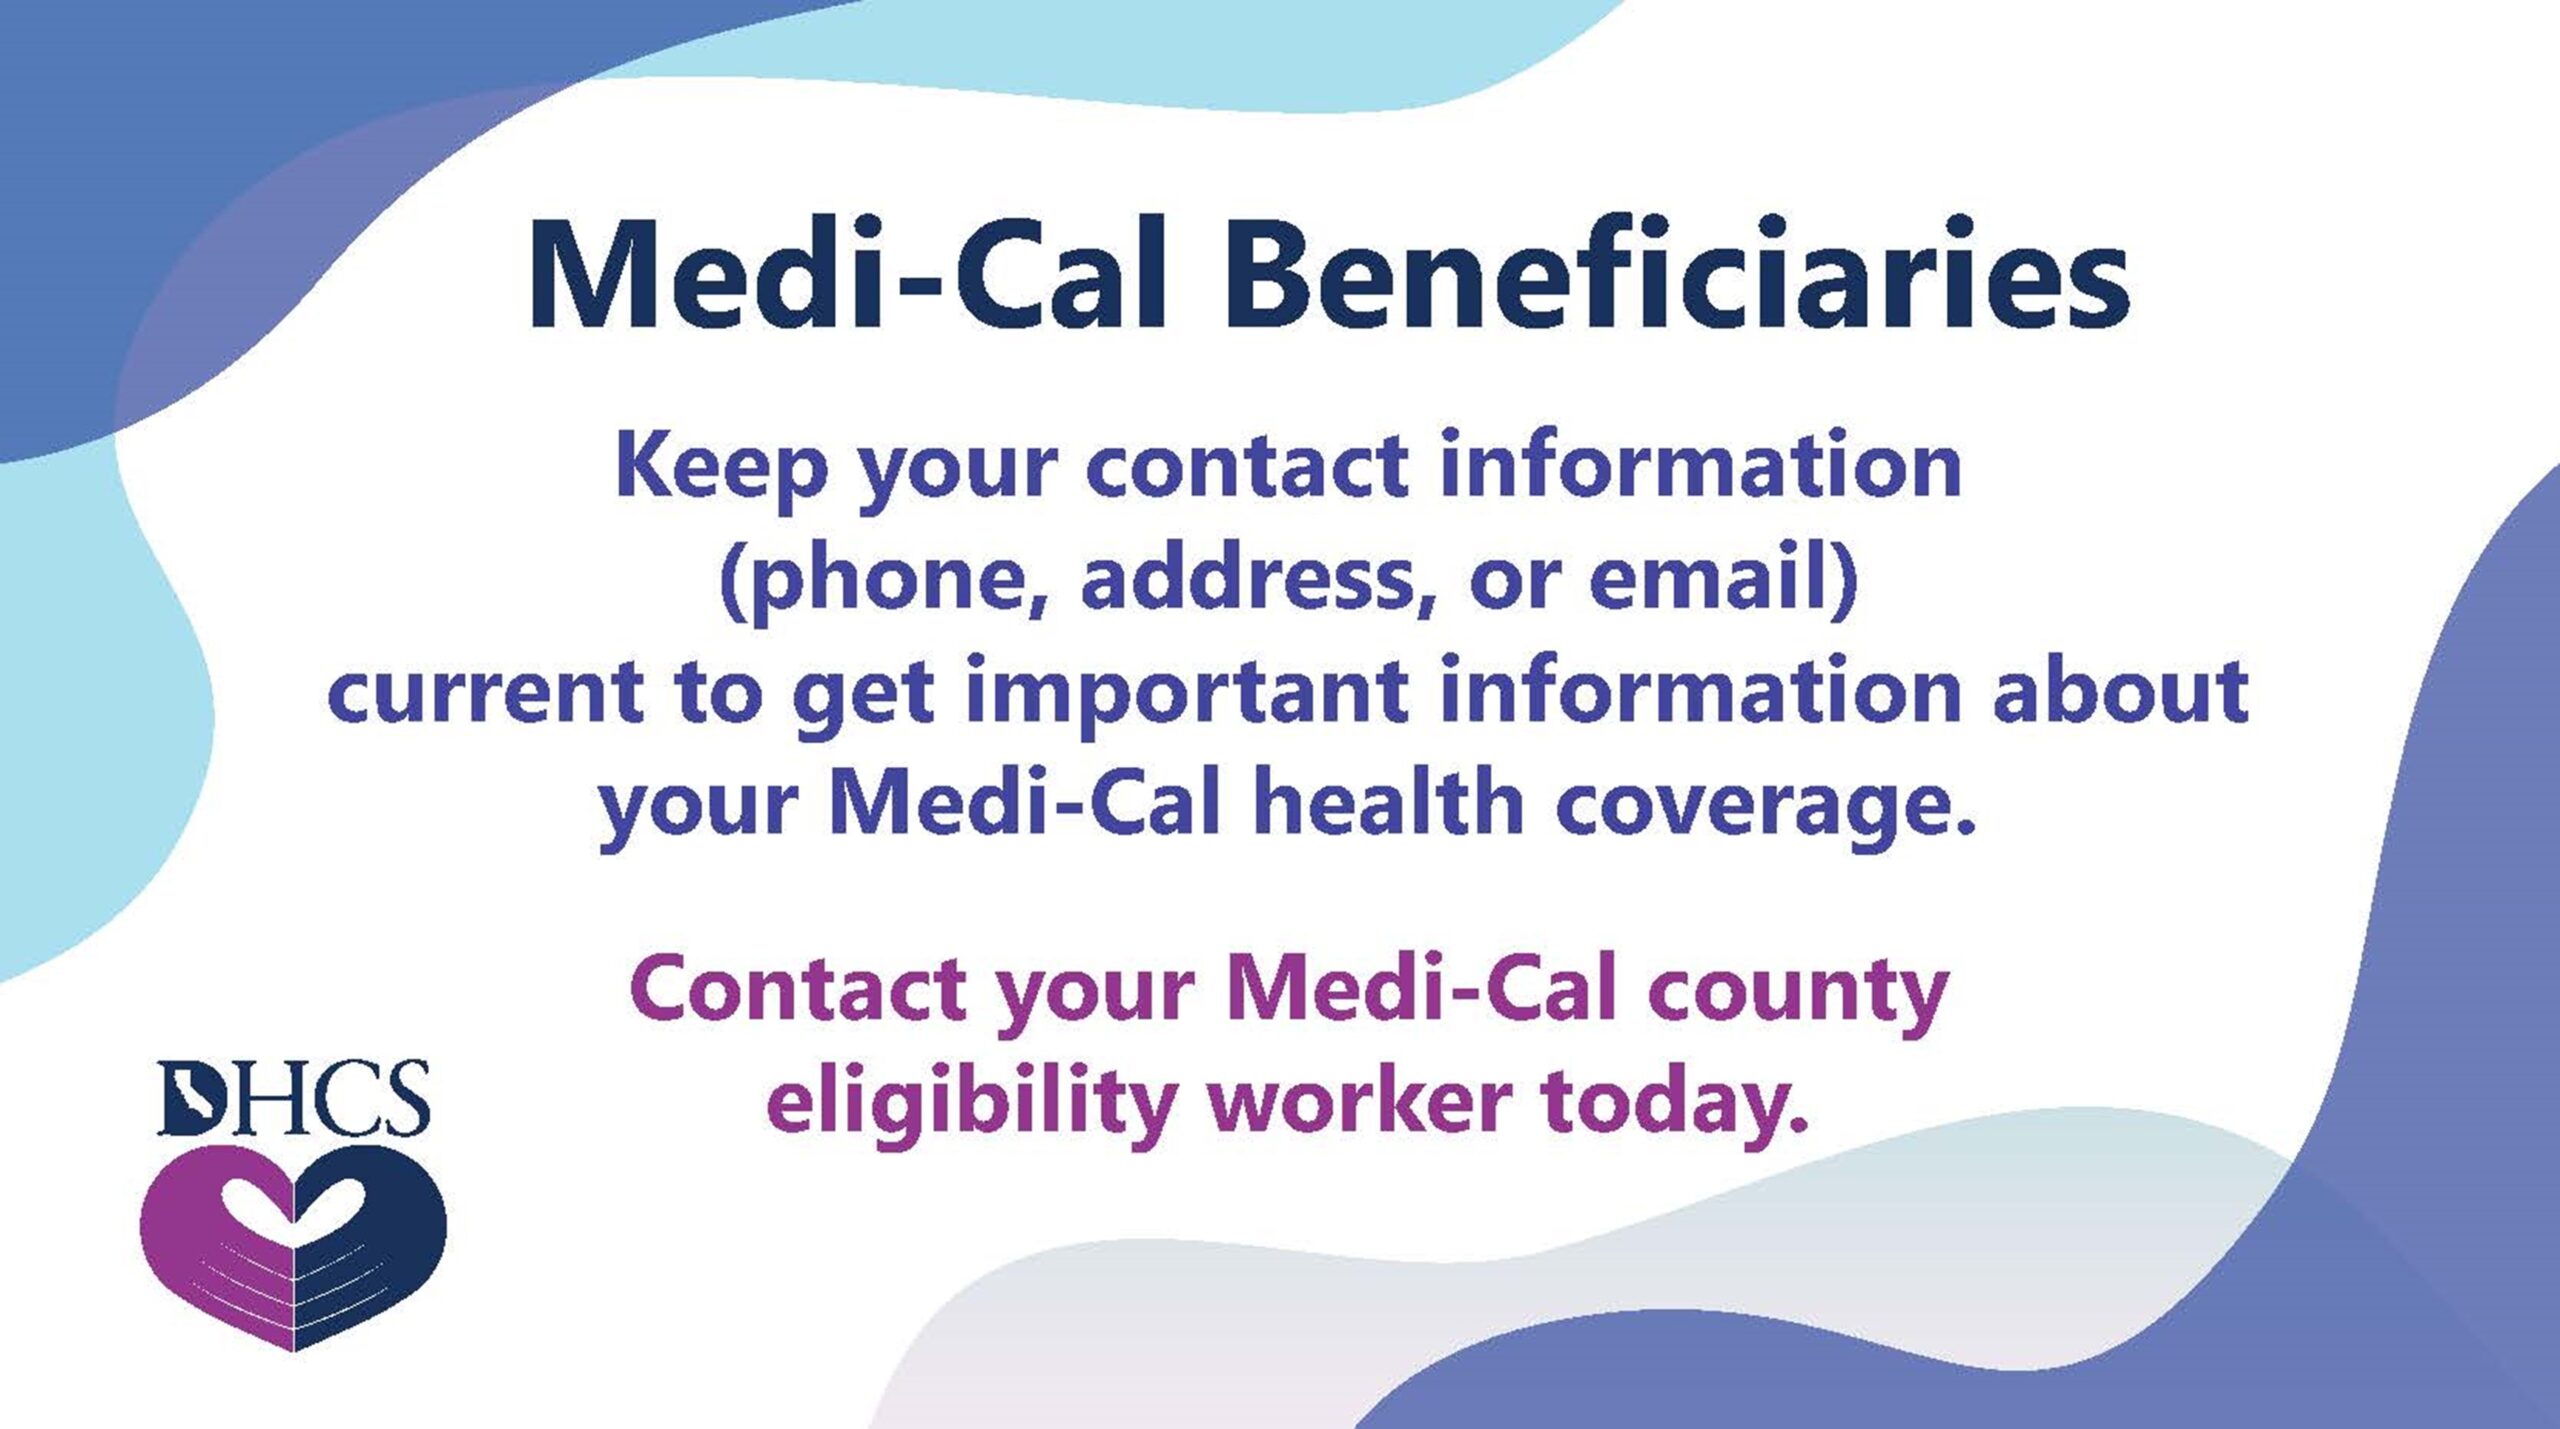 MediCal Renewals Start April 1, 2023. Update Your Contact Info Now!